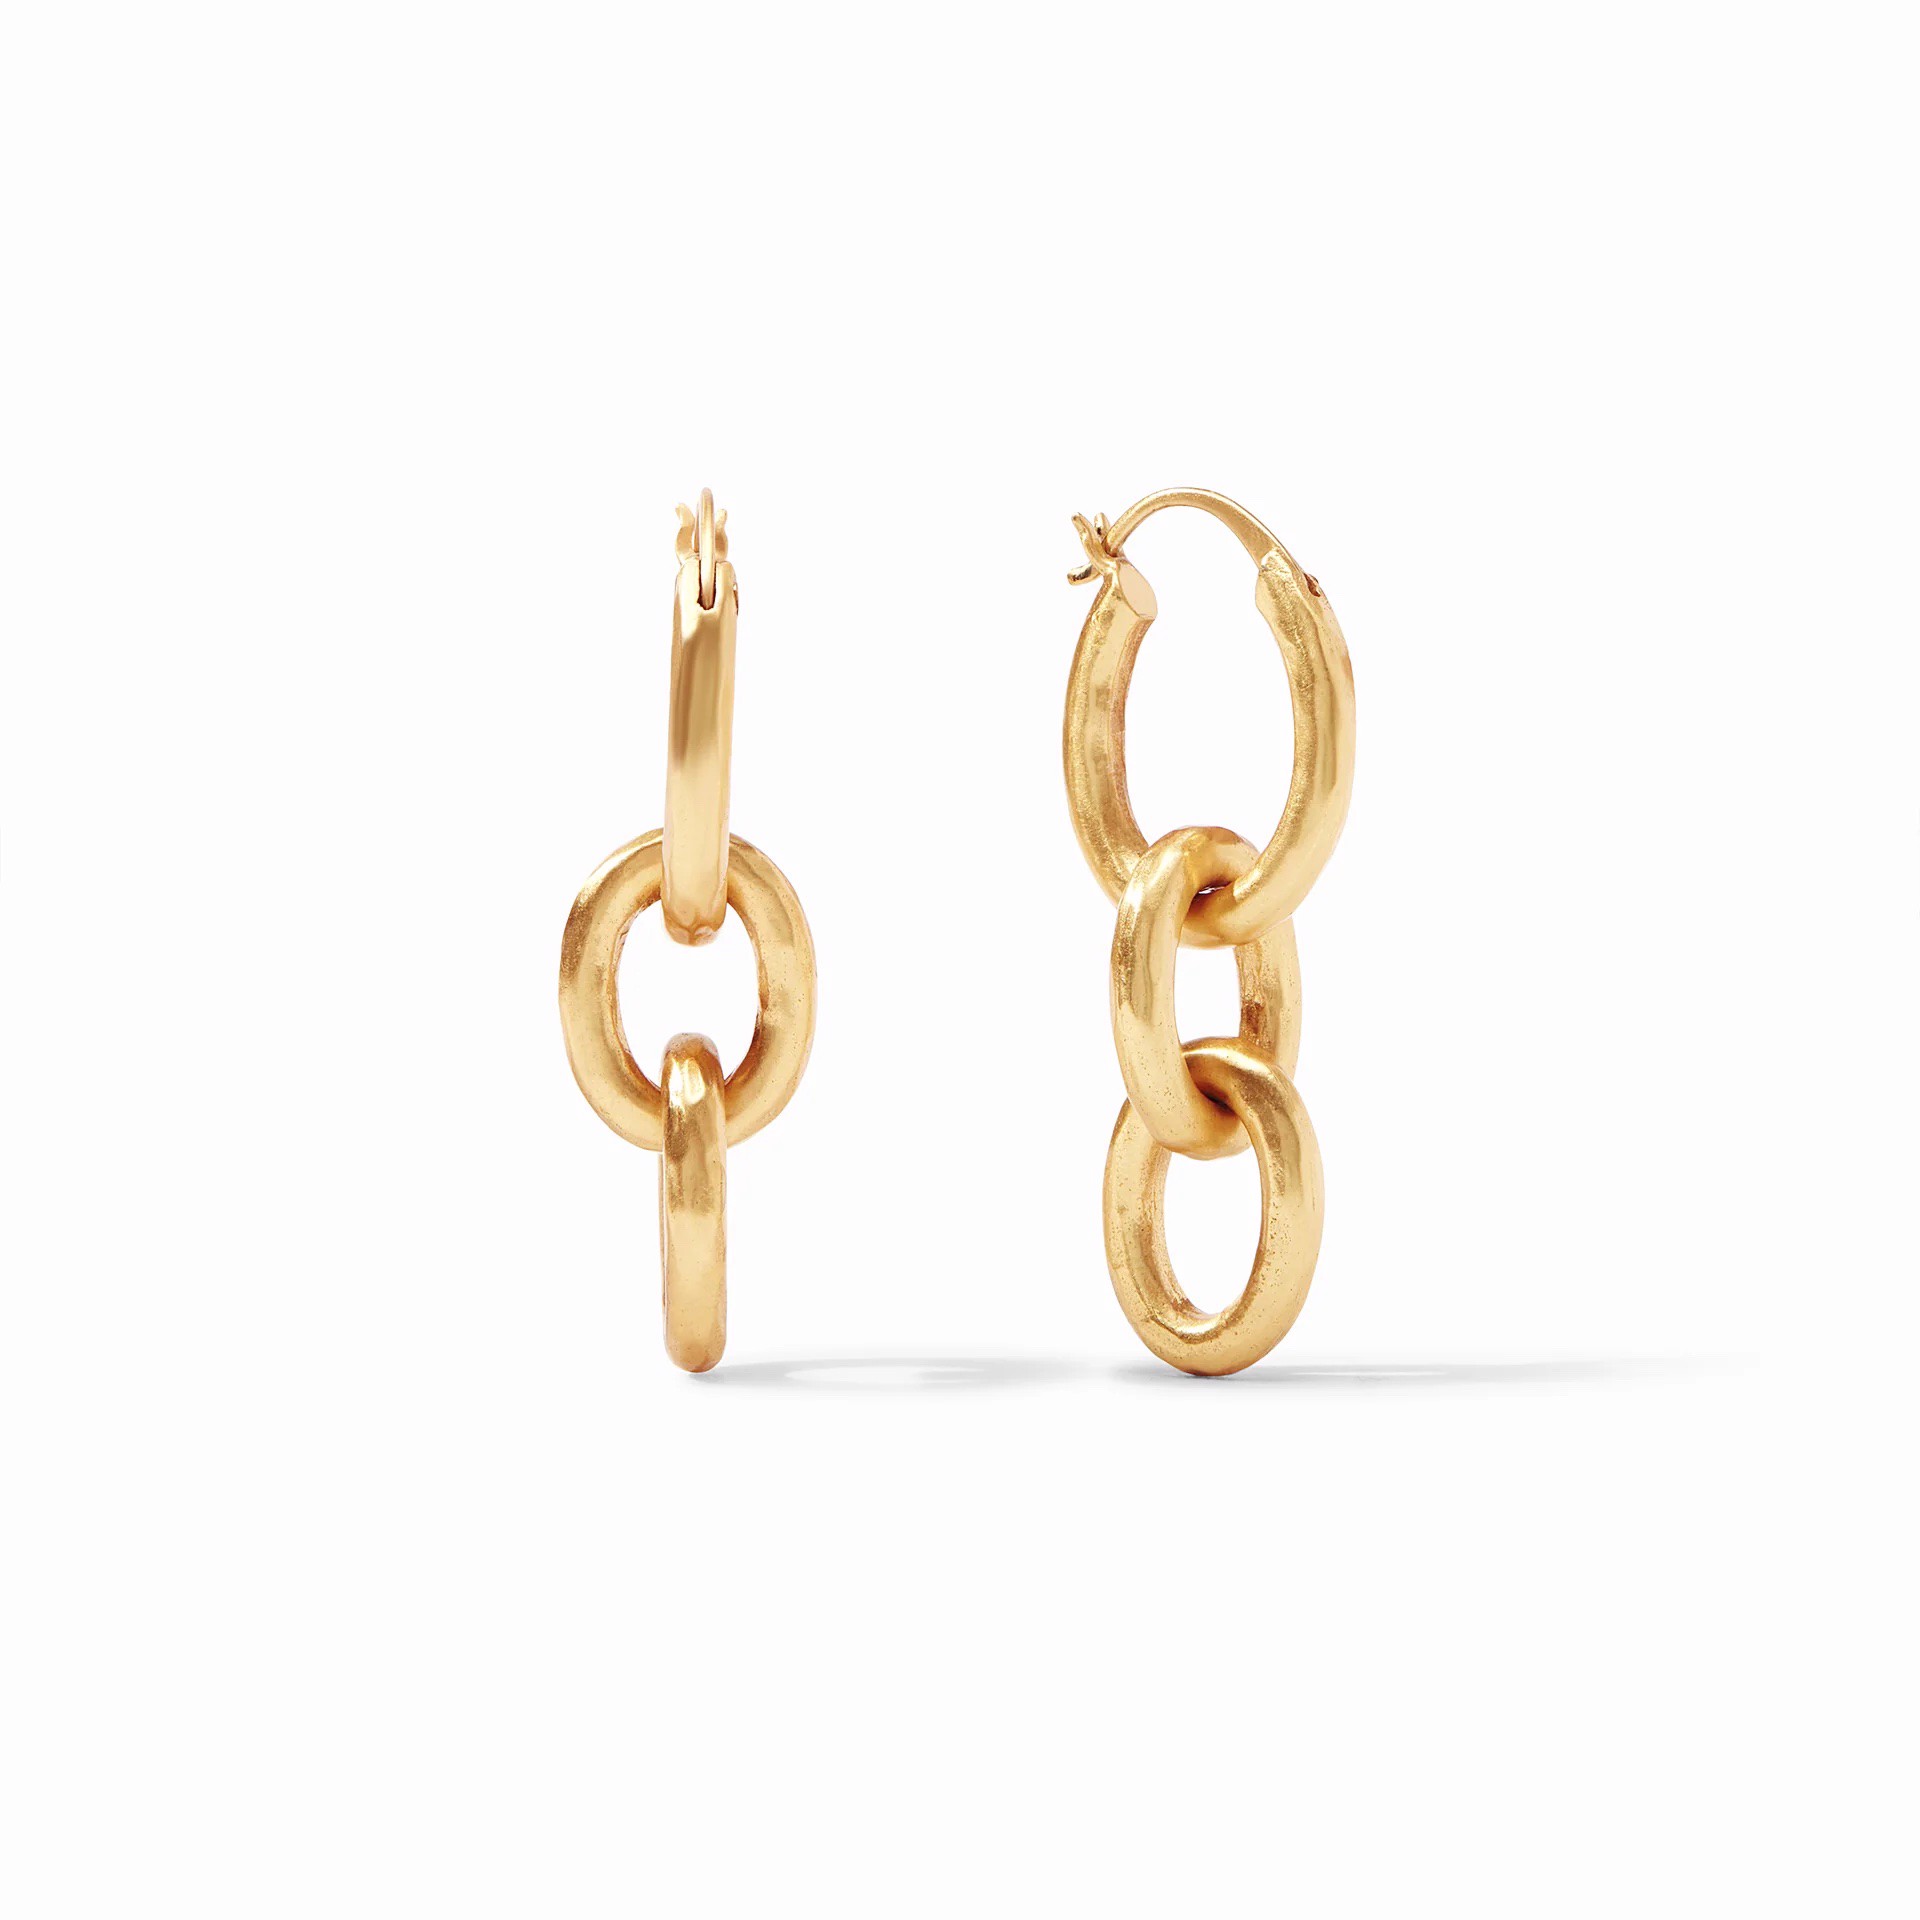 Palermo 2-in-1 Earring by Julie Vos